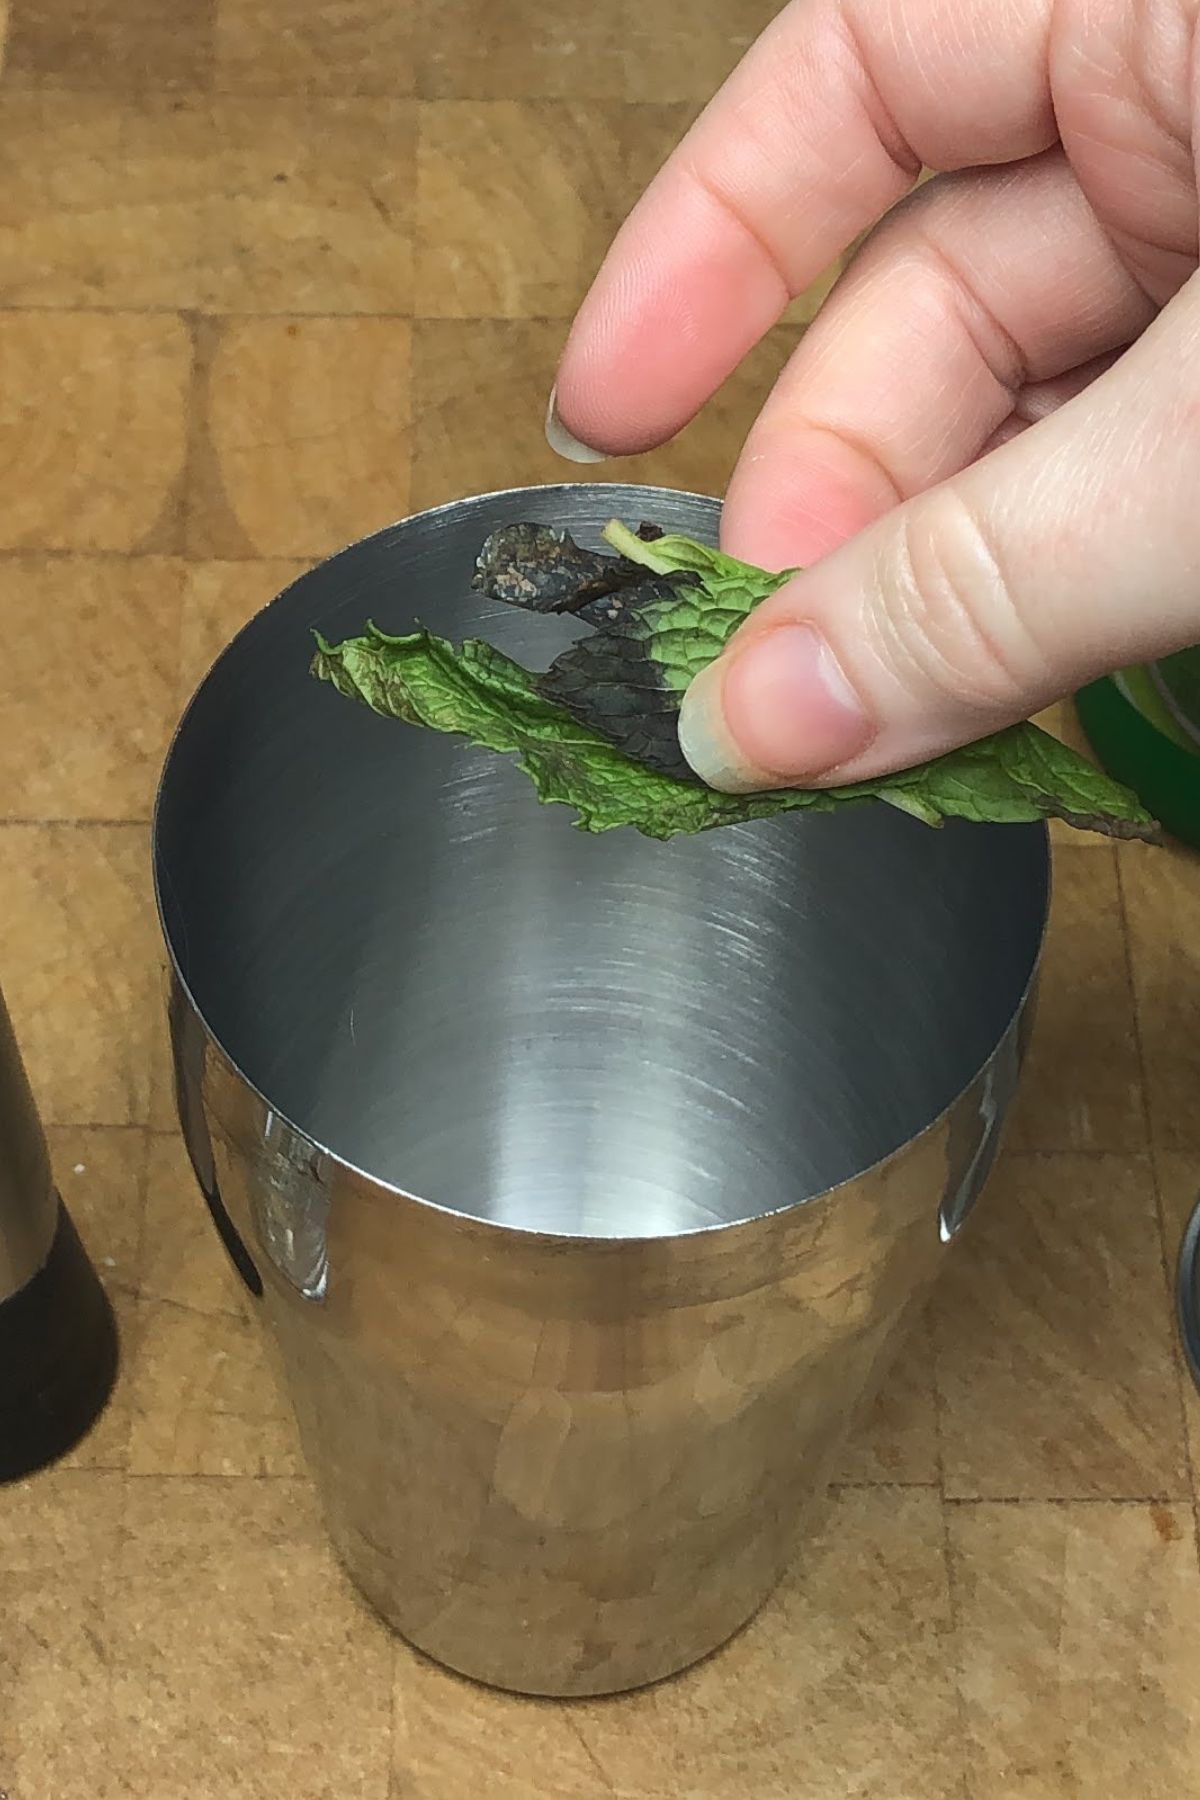 Tossing mint leaves into a shaker.